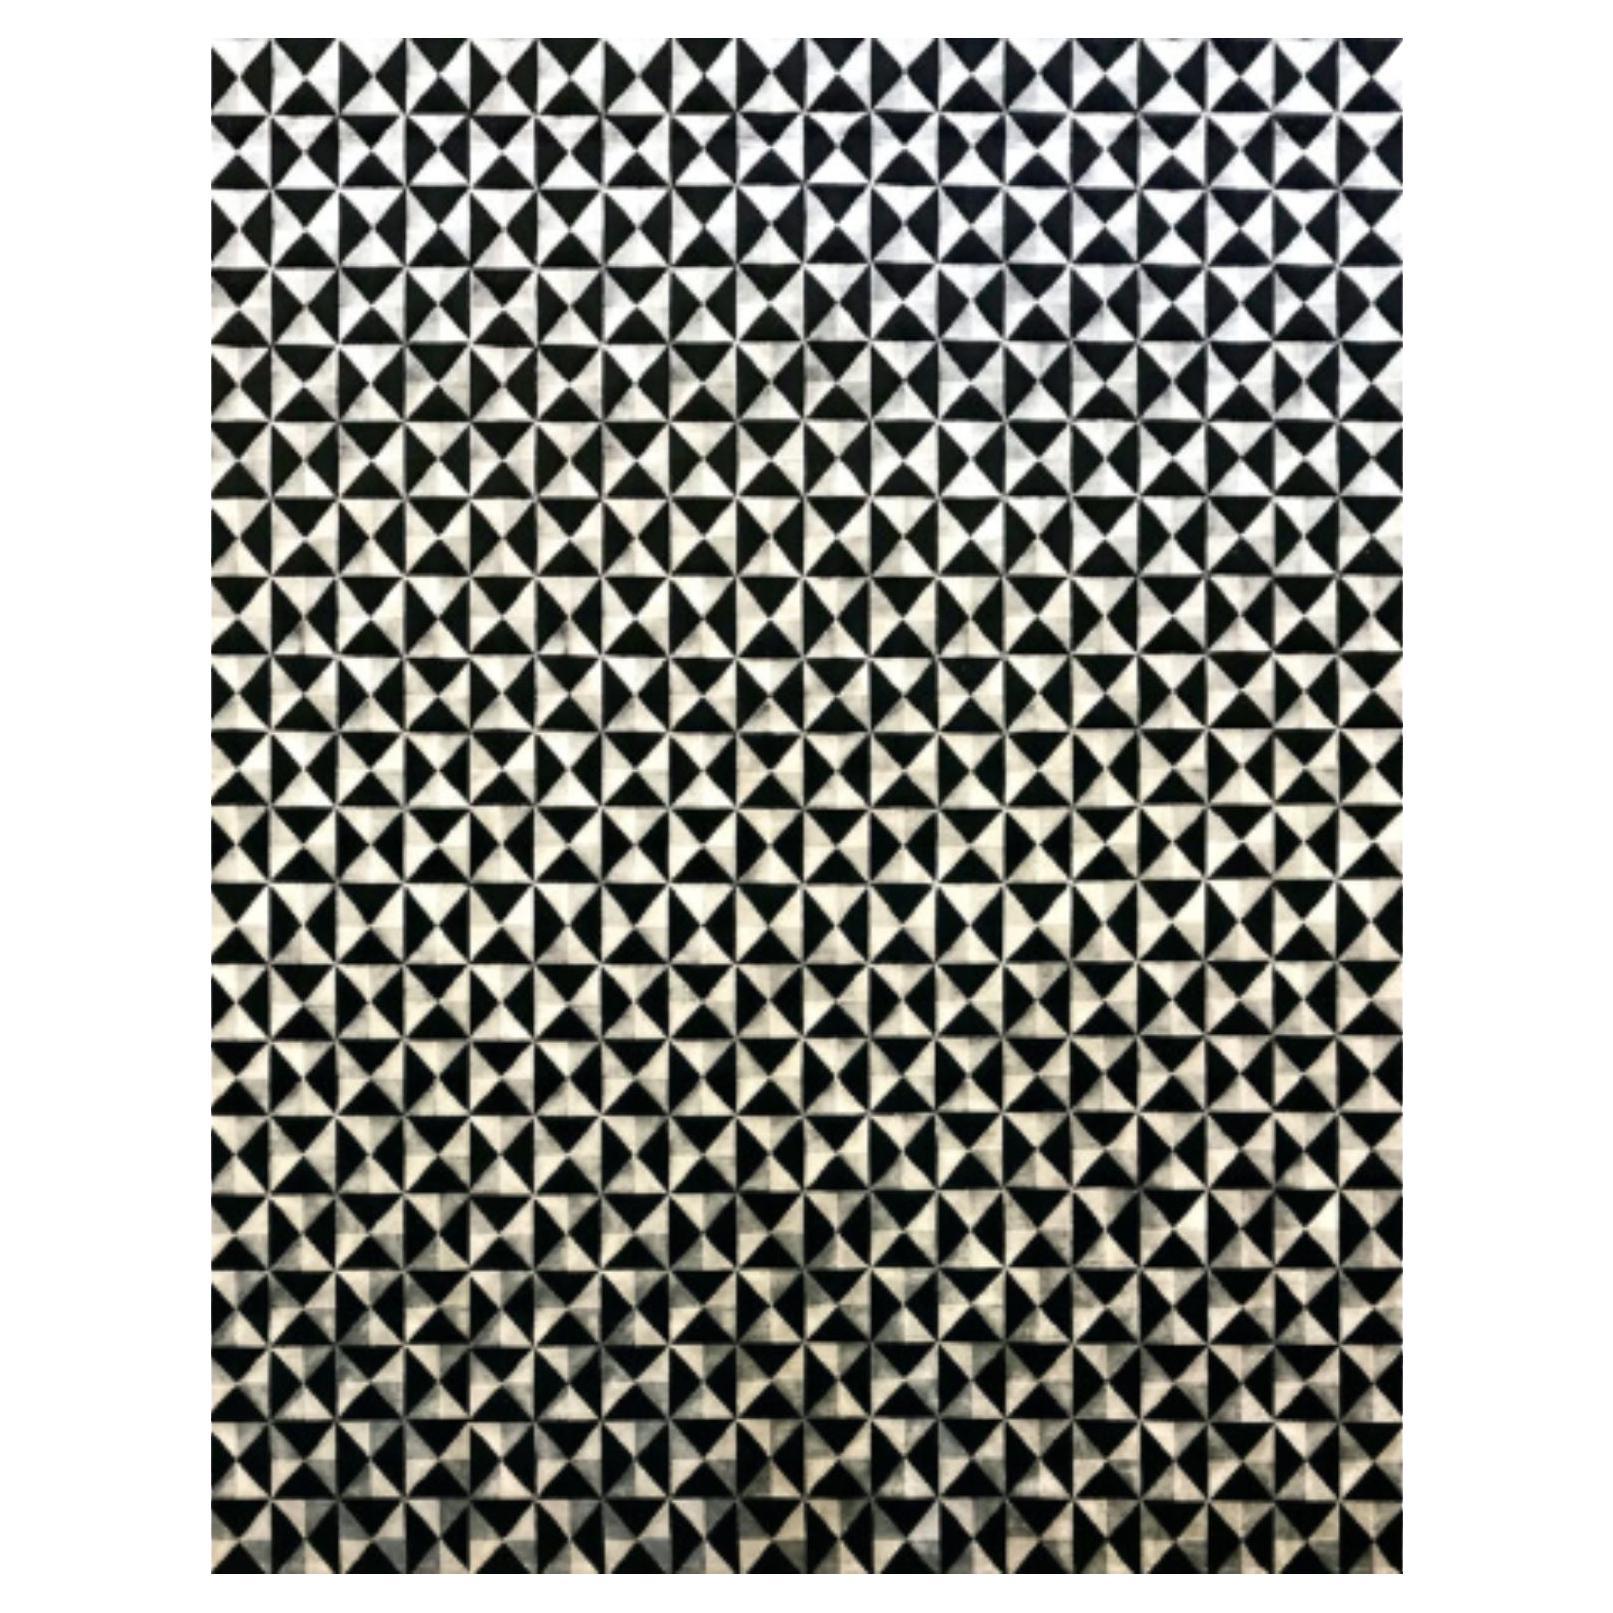 Illusion 200 Rug by Illulian For Sale